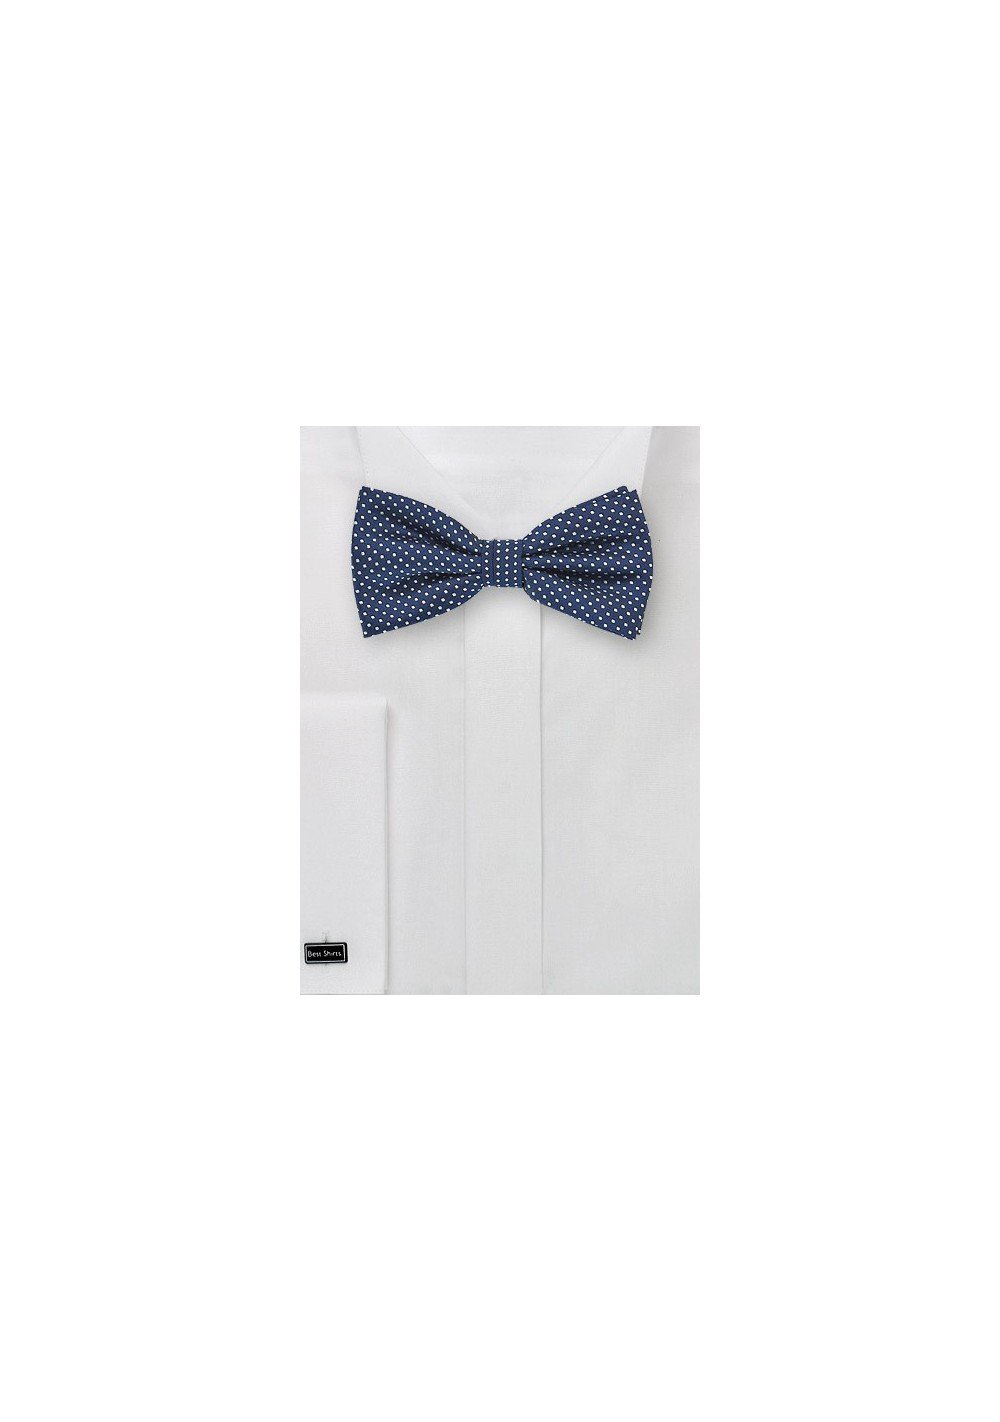 Navy Blue Bow Tie with Pin Dots